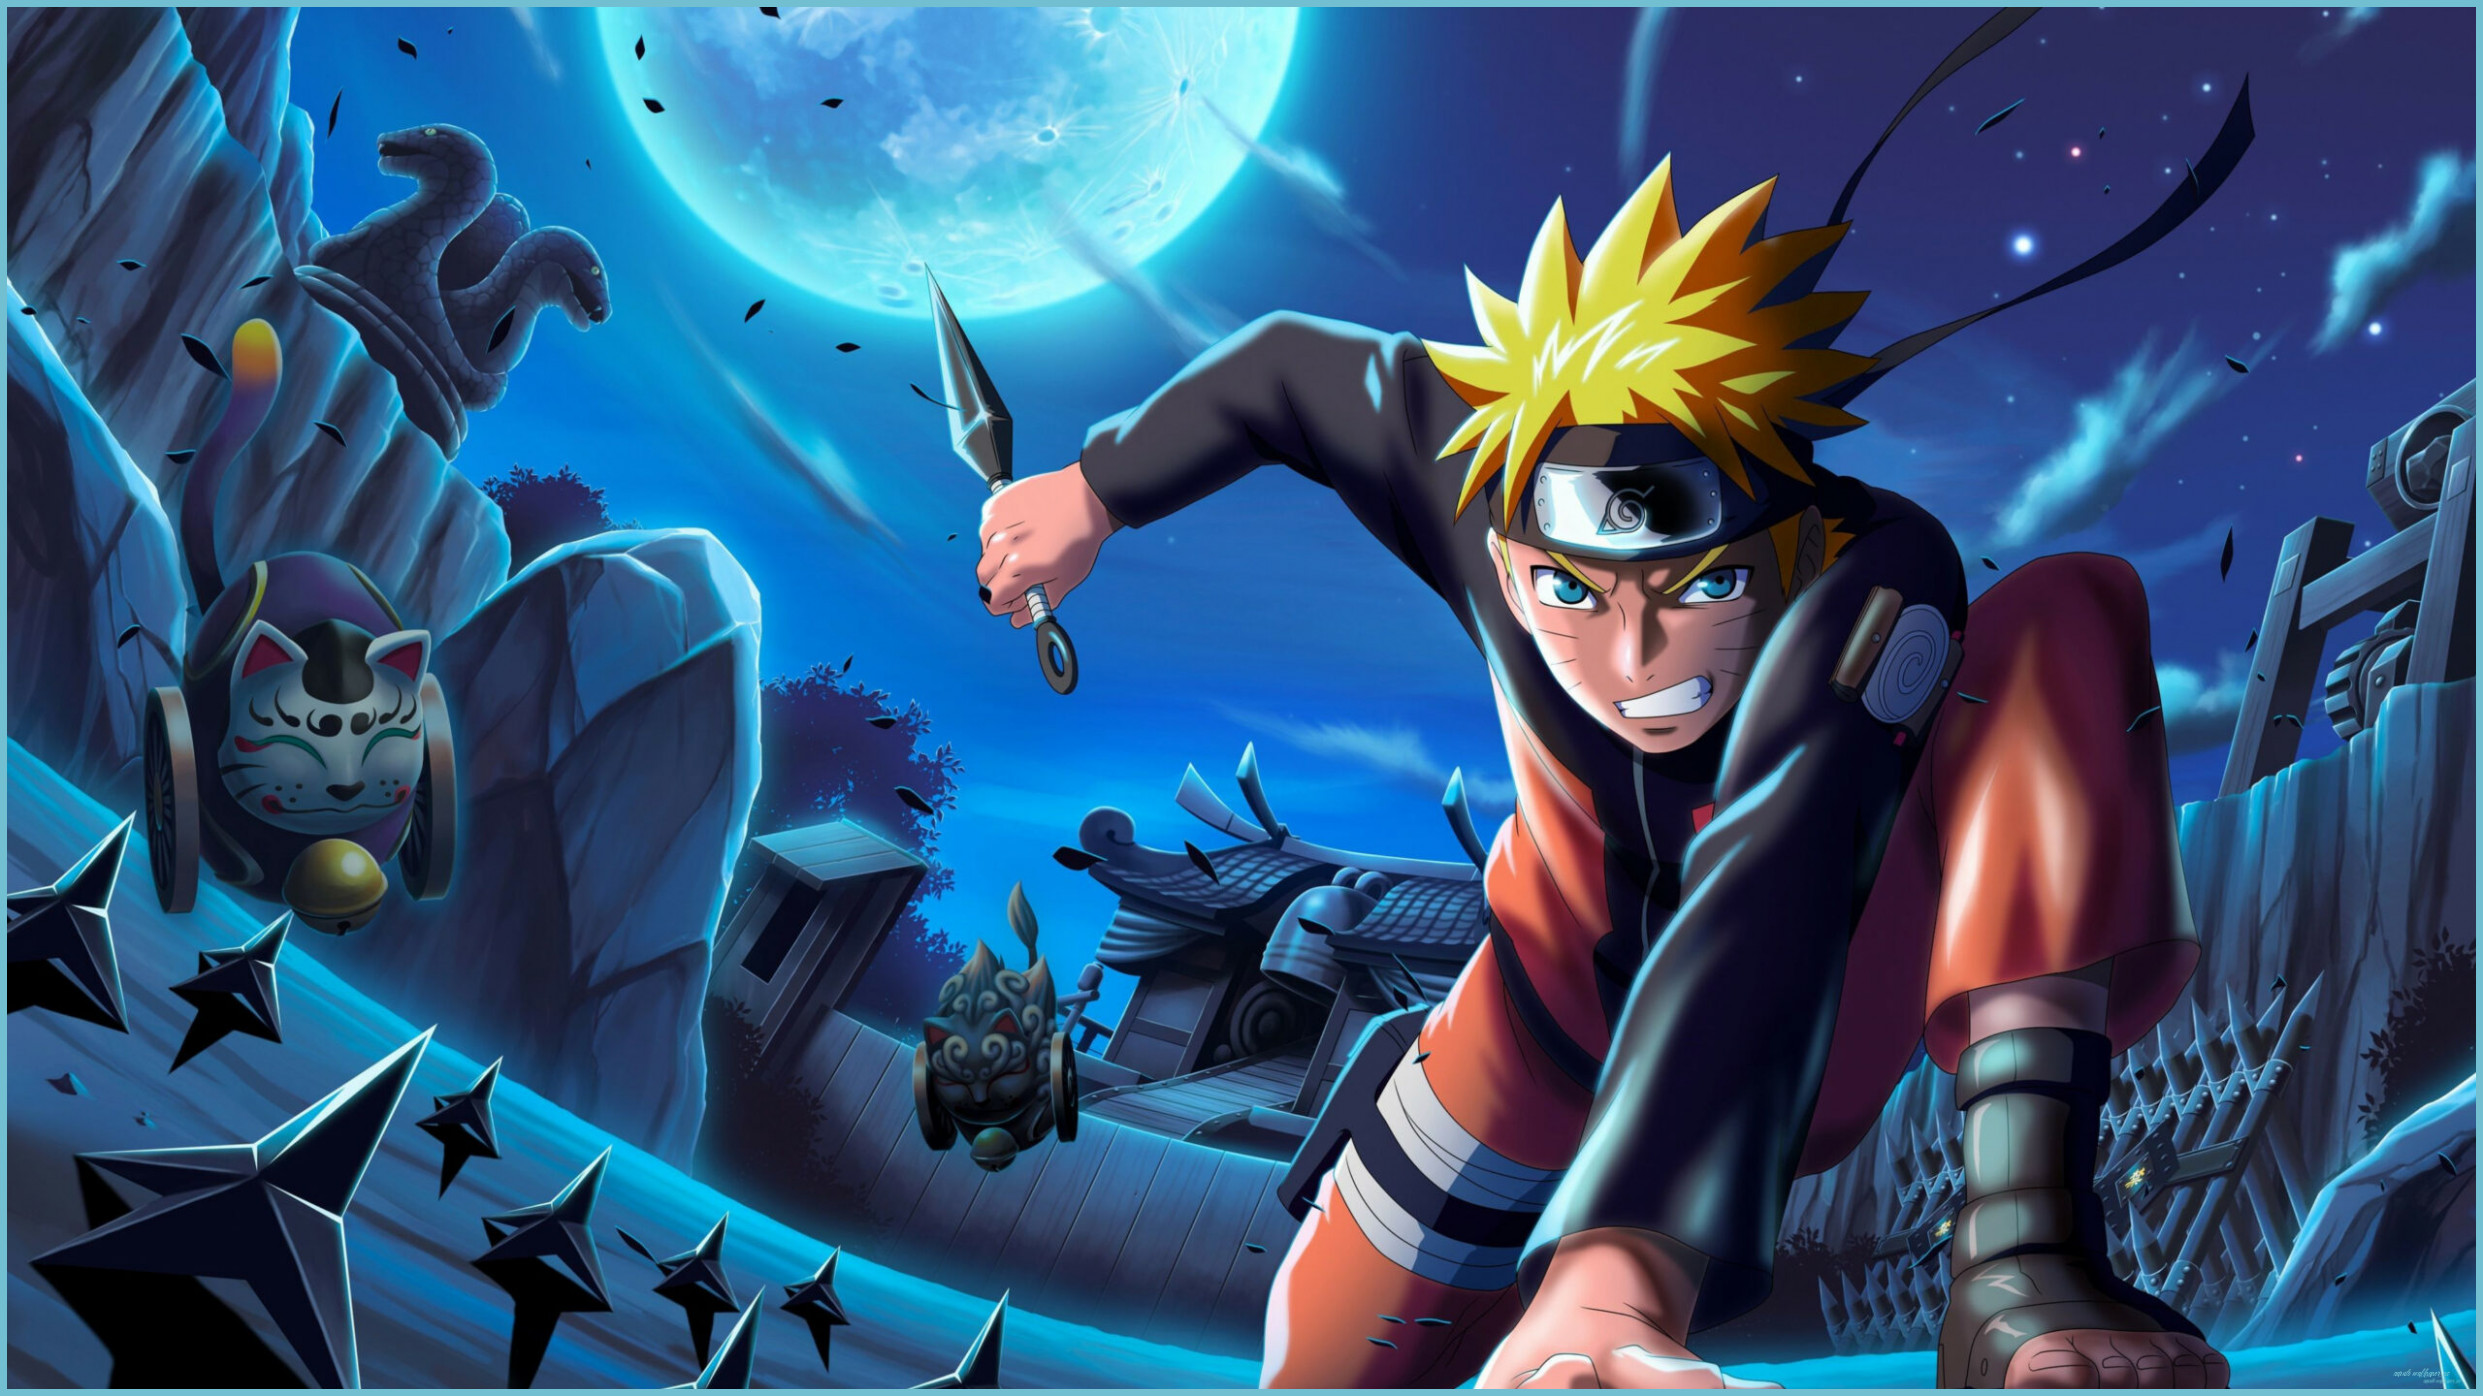 What's So Trendy About Naruto Wallpaper Pc That Everyone Went Crazy Over It?. Naruto Wallpaper Pc